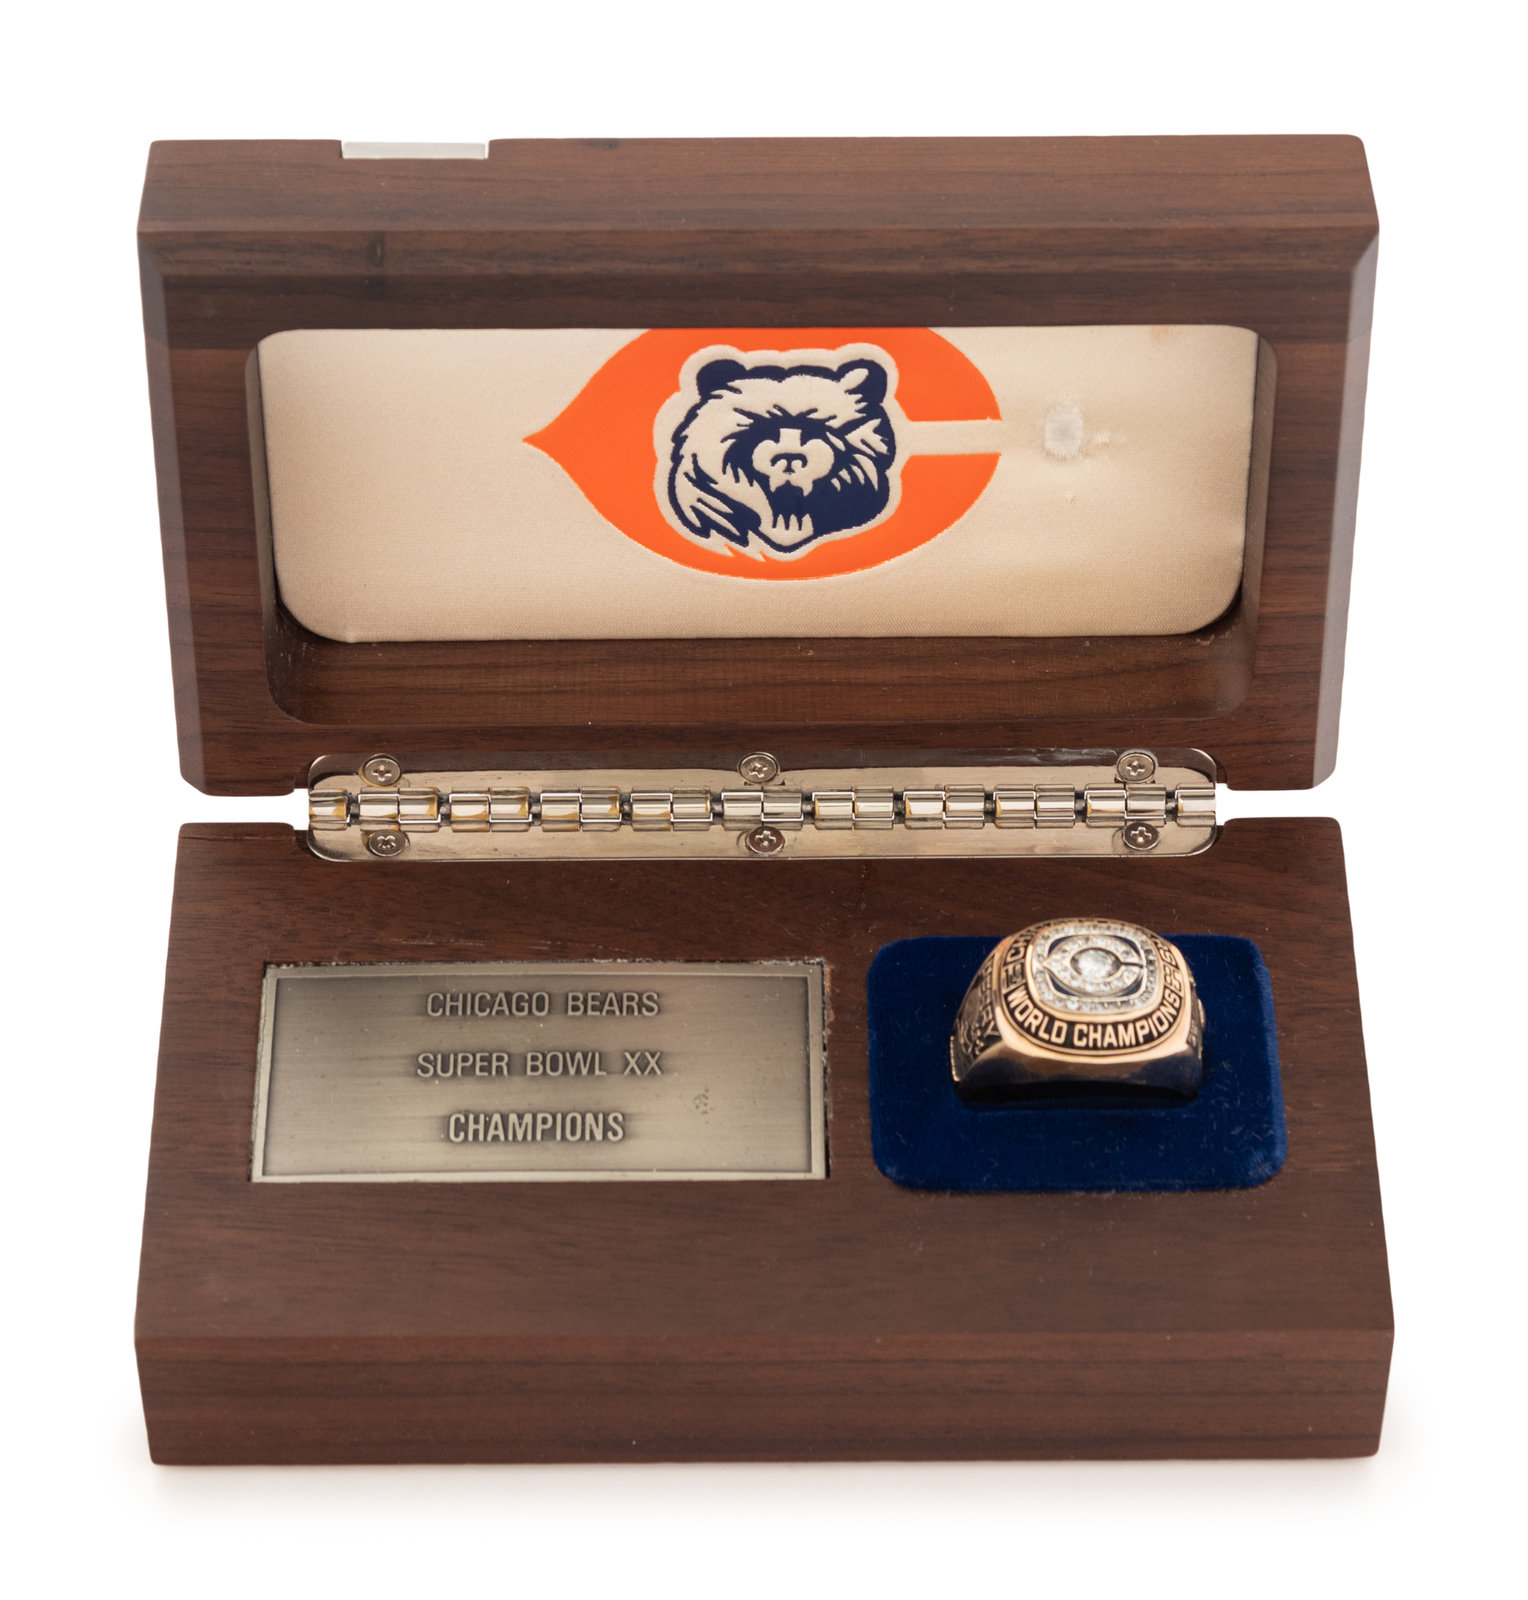 A Rare Jostens 1985 Chicago Bears Super Bowl XX Championship Salesman  Sample Ring Crafted to William 'The Refrigerator' Perry's Size With  Original Presentation Box